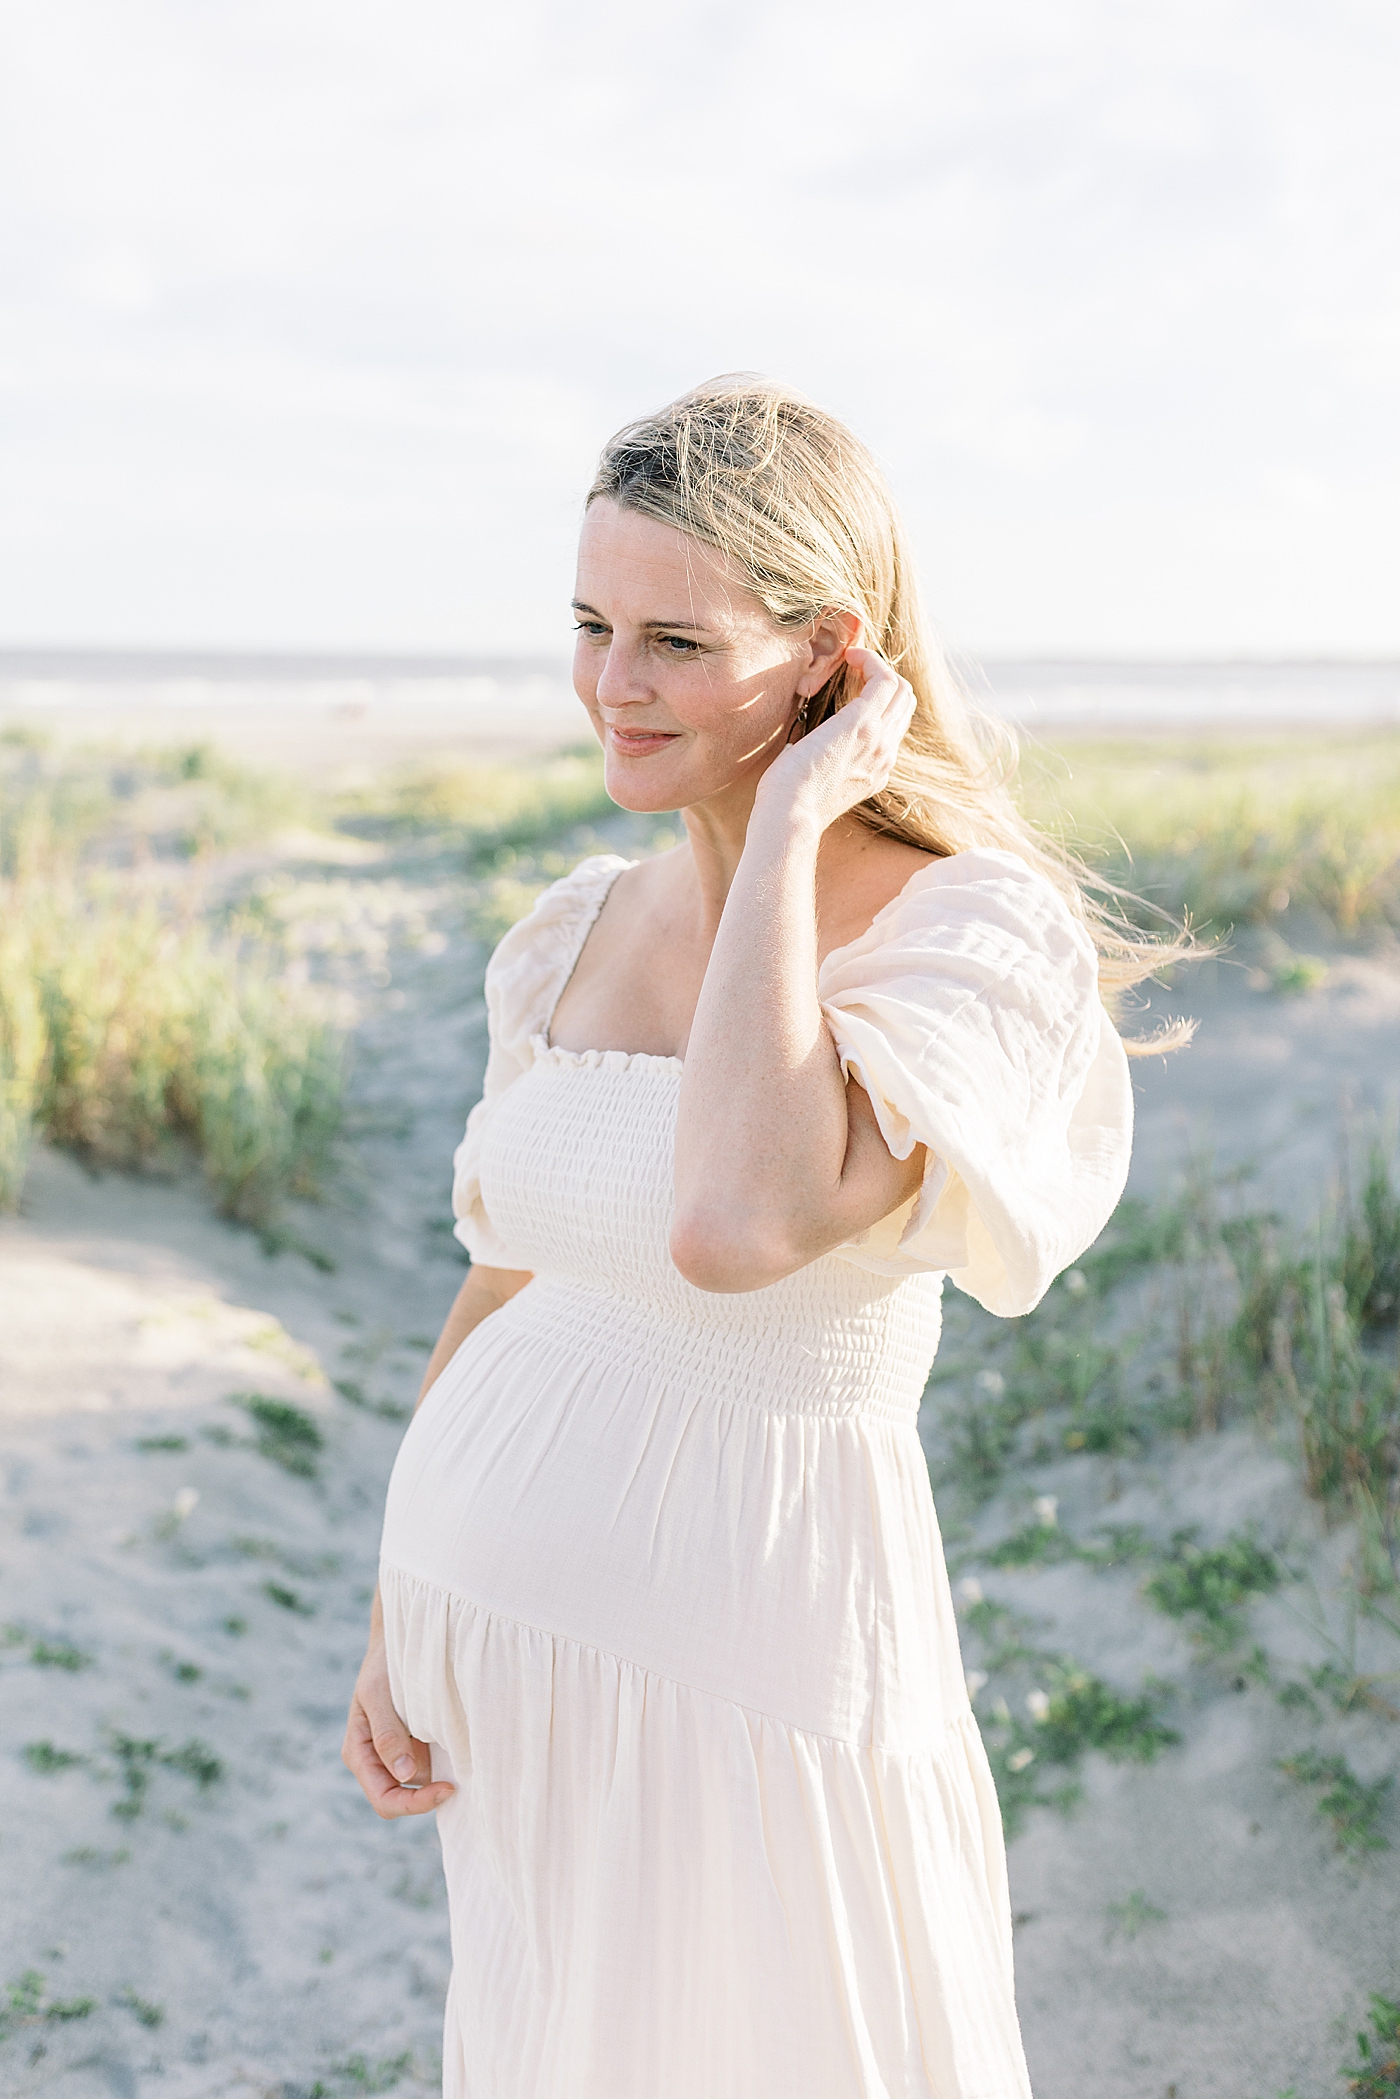 Pregnant mom in a cream dress holding her belly during Maternity Session at Folly Beach | Image by Caitlyn Motycka